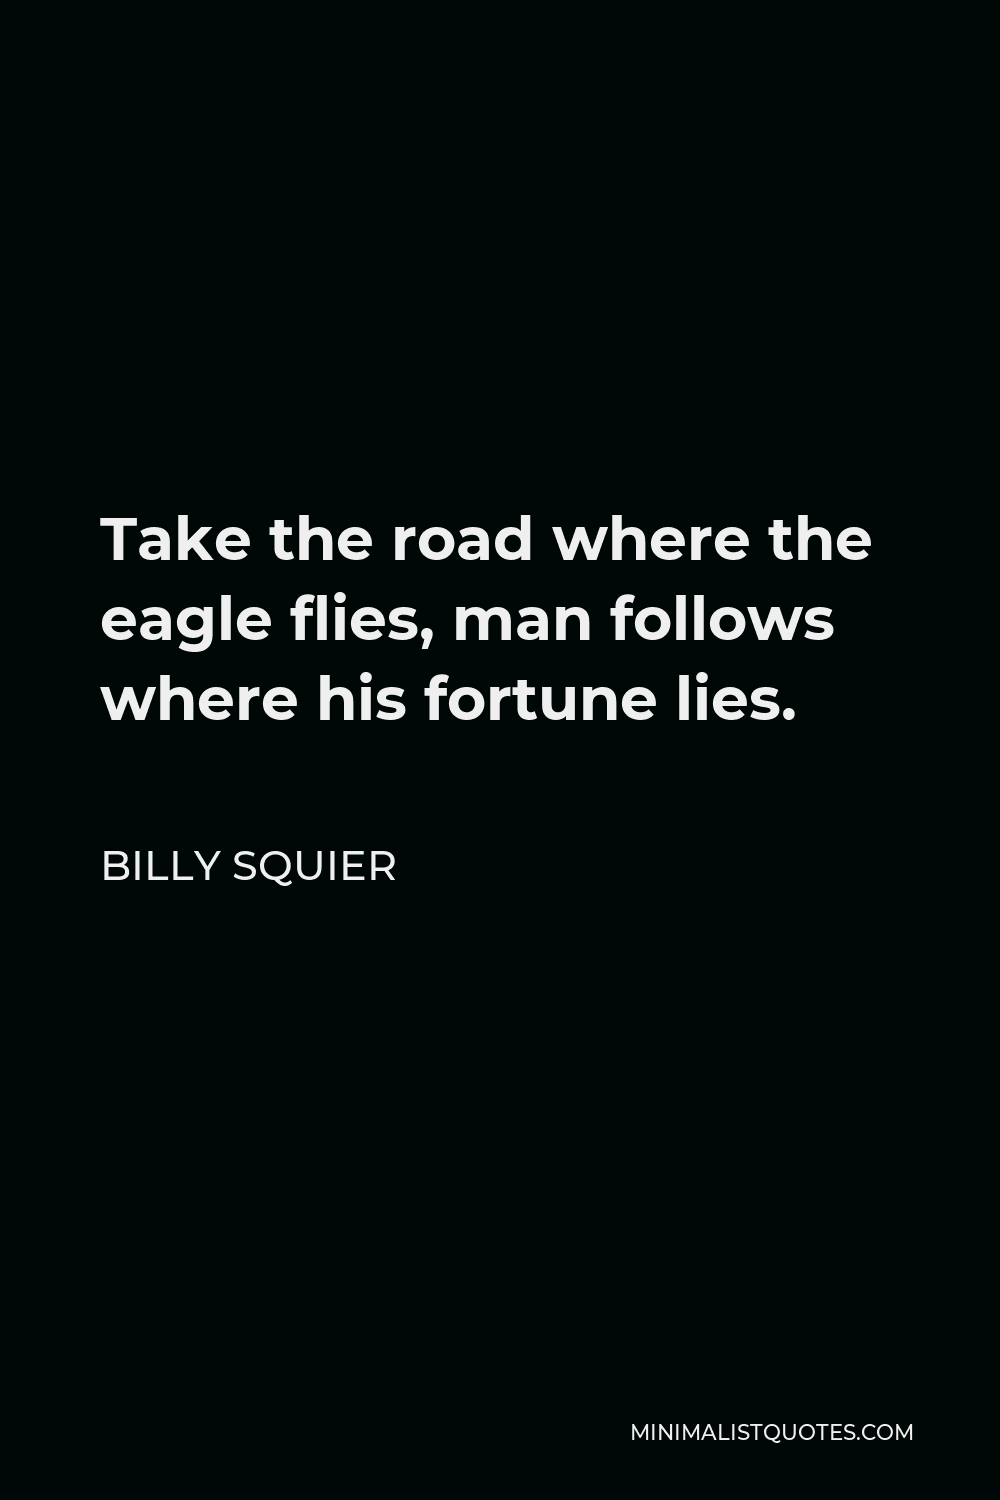 Billy Squier Quote - Take the road where the eagle flies, man follows where his fortune lies.